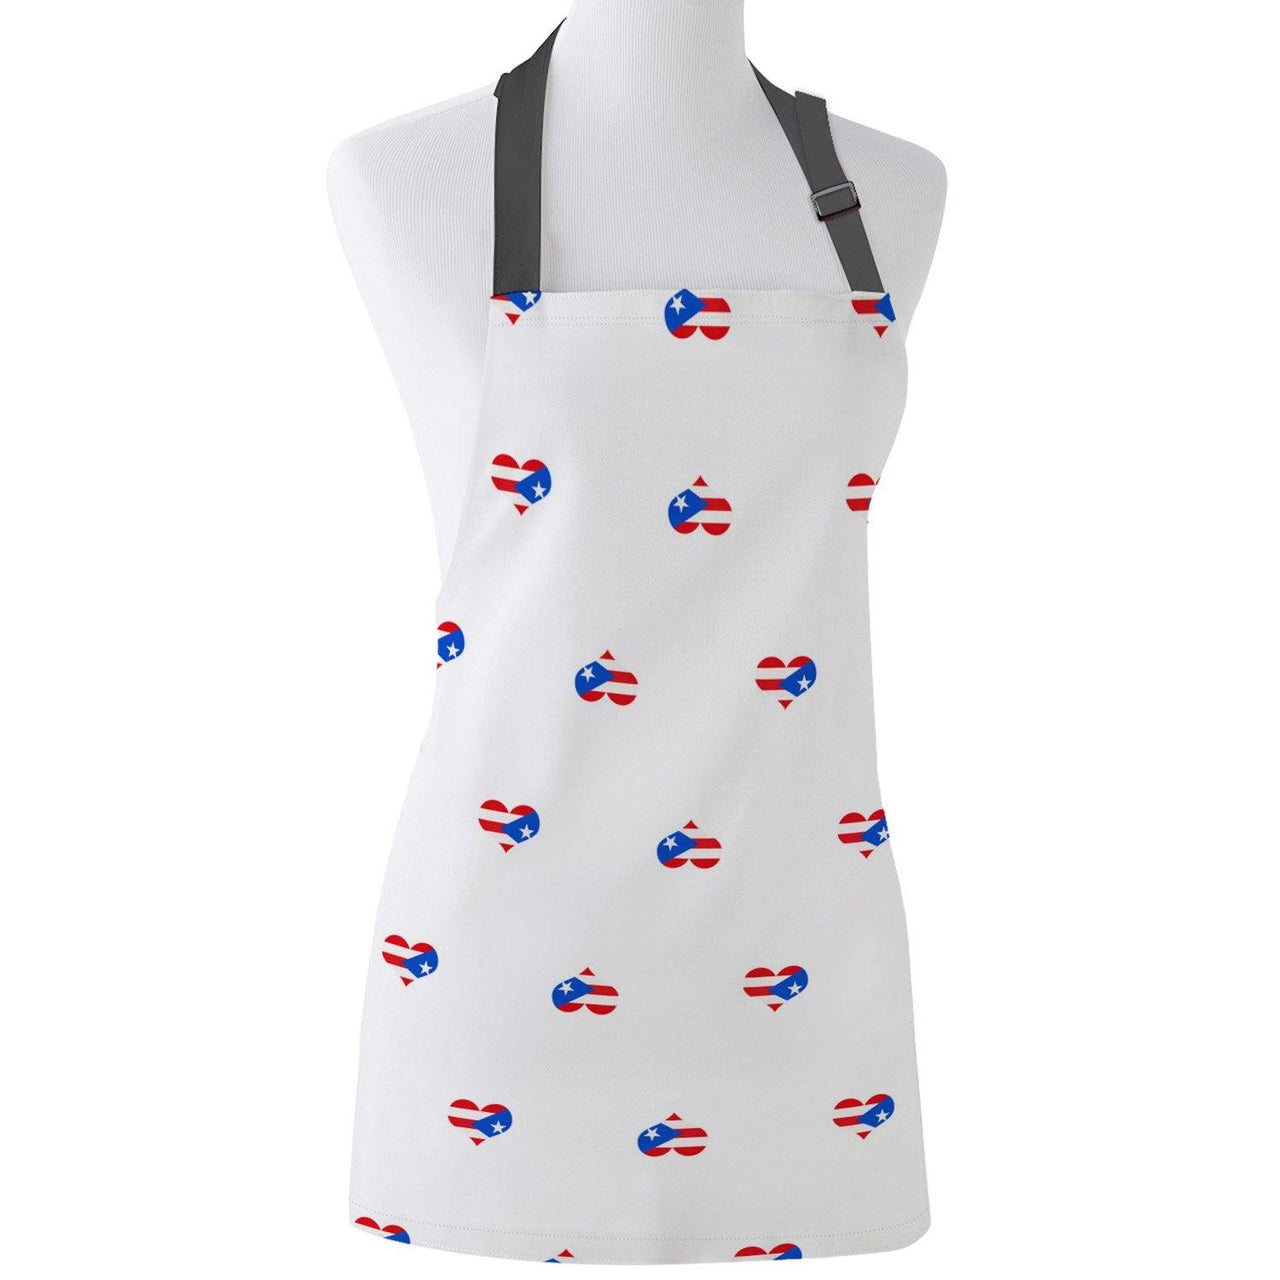 Puerto Rico Aprons (6 Styles and 2 Sizes) - Puerto Rican Pride